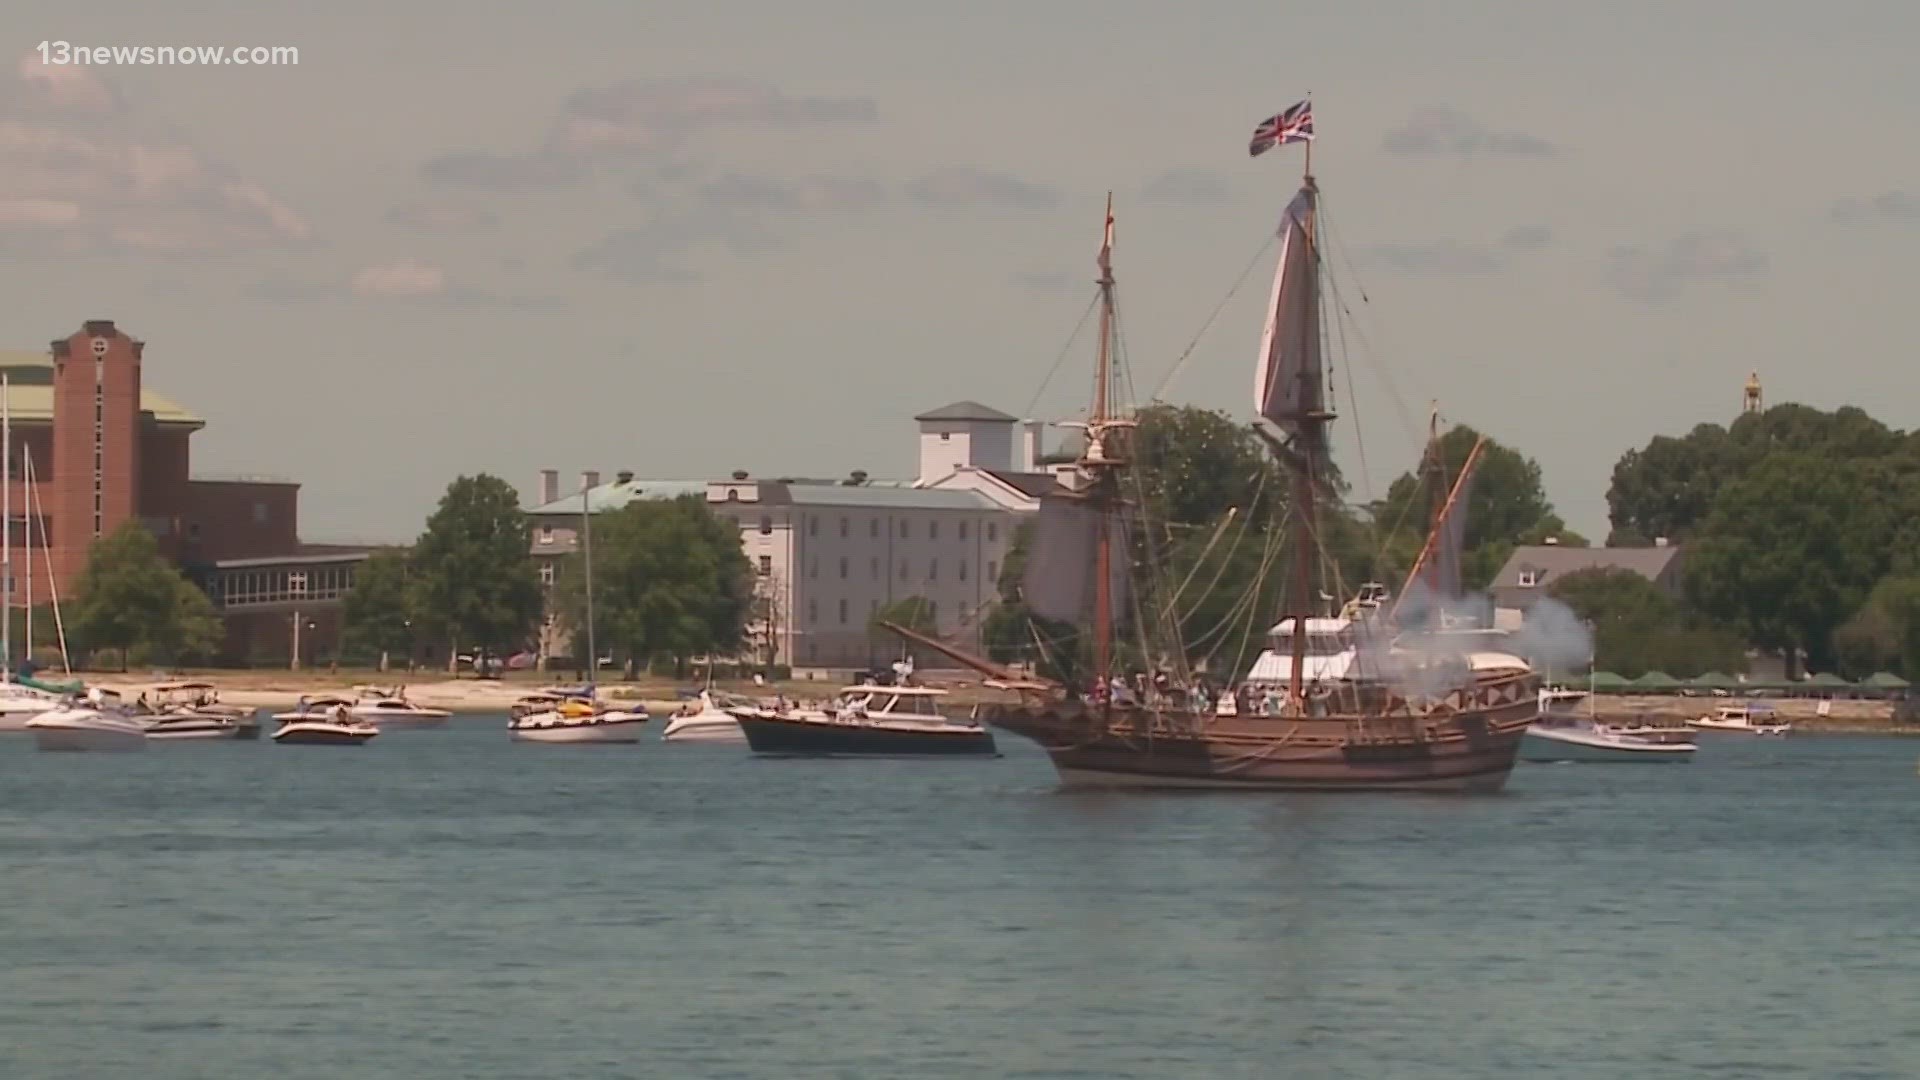 For its 47th year, the festival will have a lot to offer, from the Parade of Sail to displays of drones and fireworks on the Elizabeth River.